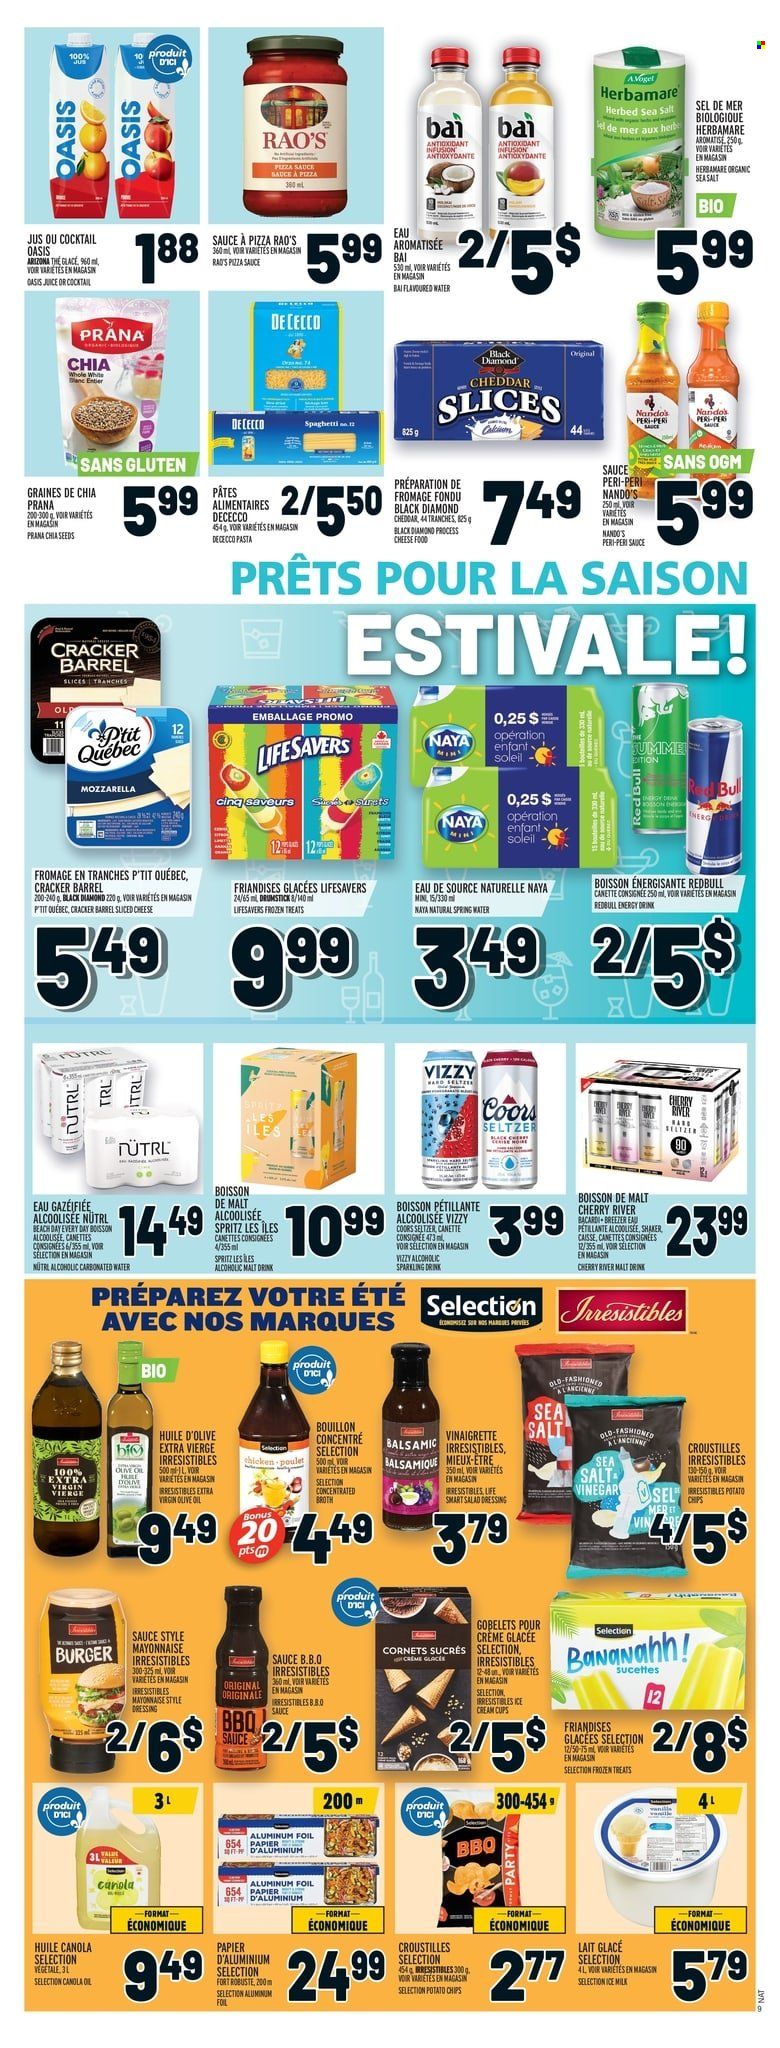 thumbnail - Metro Flyer - May 12, 2022 - May 18, 2022 - Sales products - cherries, spaghetti, pasta, sauce, milk, mayonnaise, crackers, potato chips, bouillon, broth, malt, chia seeds, salad dressing, vinaigrette dressing, dressing, canola oil, extra virgin olive oil, olive oil, juice, energy drink, AriZona, Bai, seltzer water, spring water, Bacardi, beer, shaker, cup, aluminium foil, Coors. Page 8.